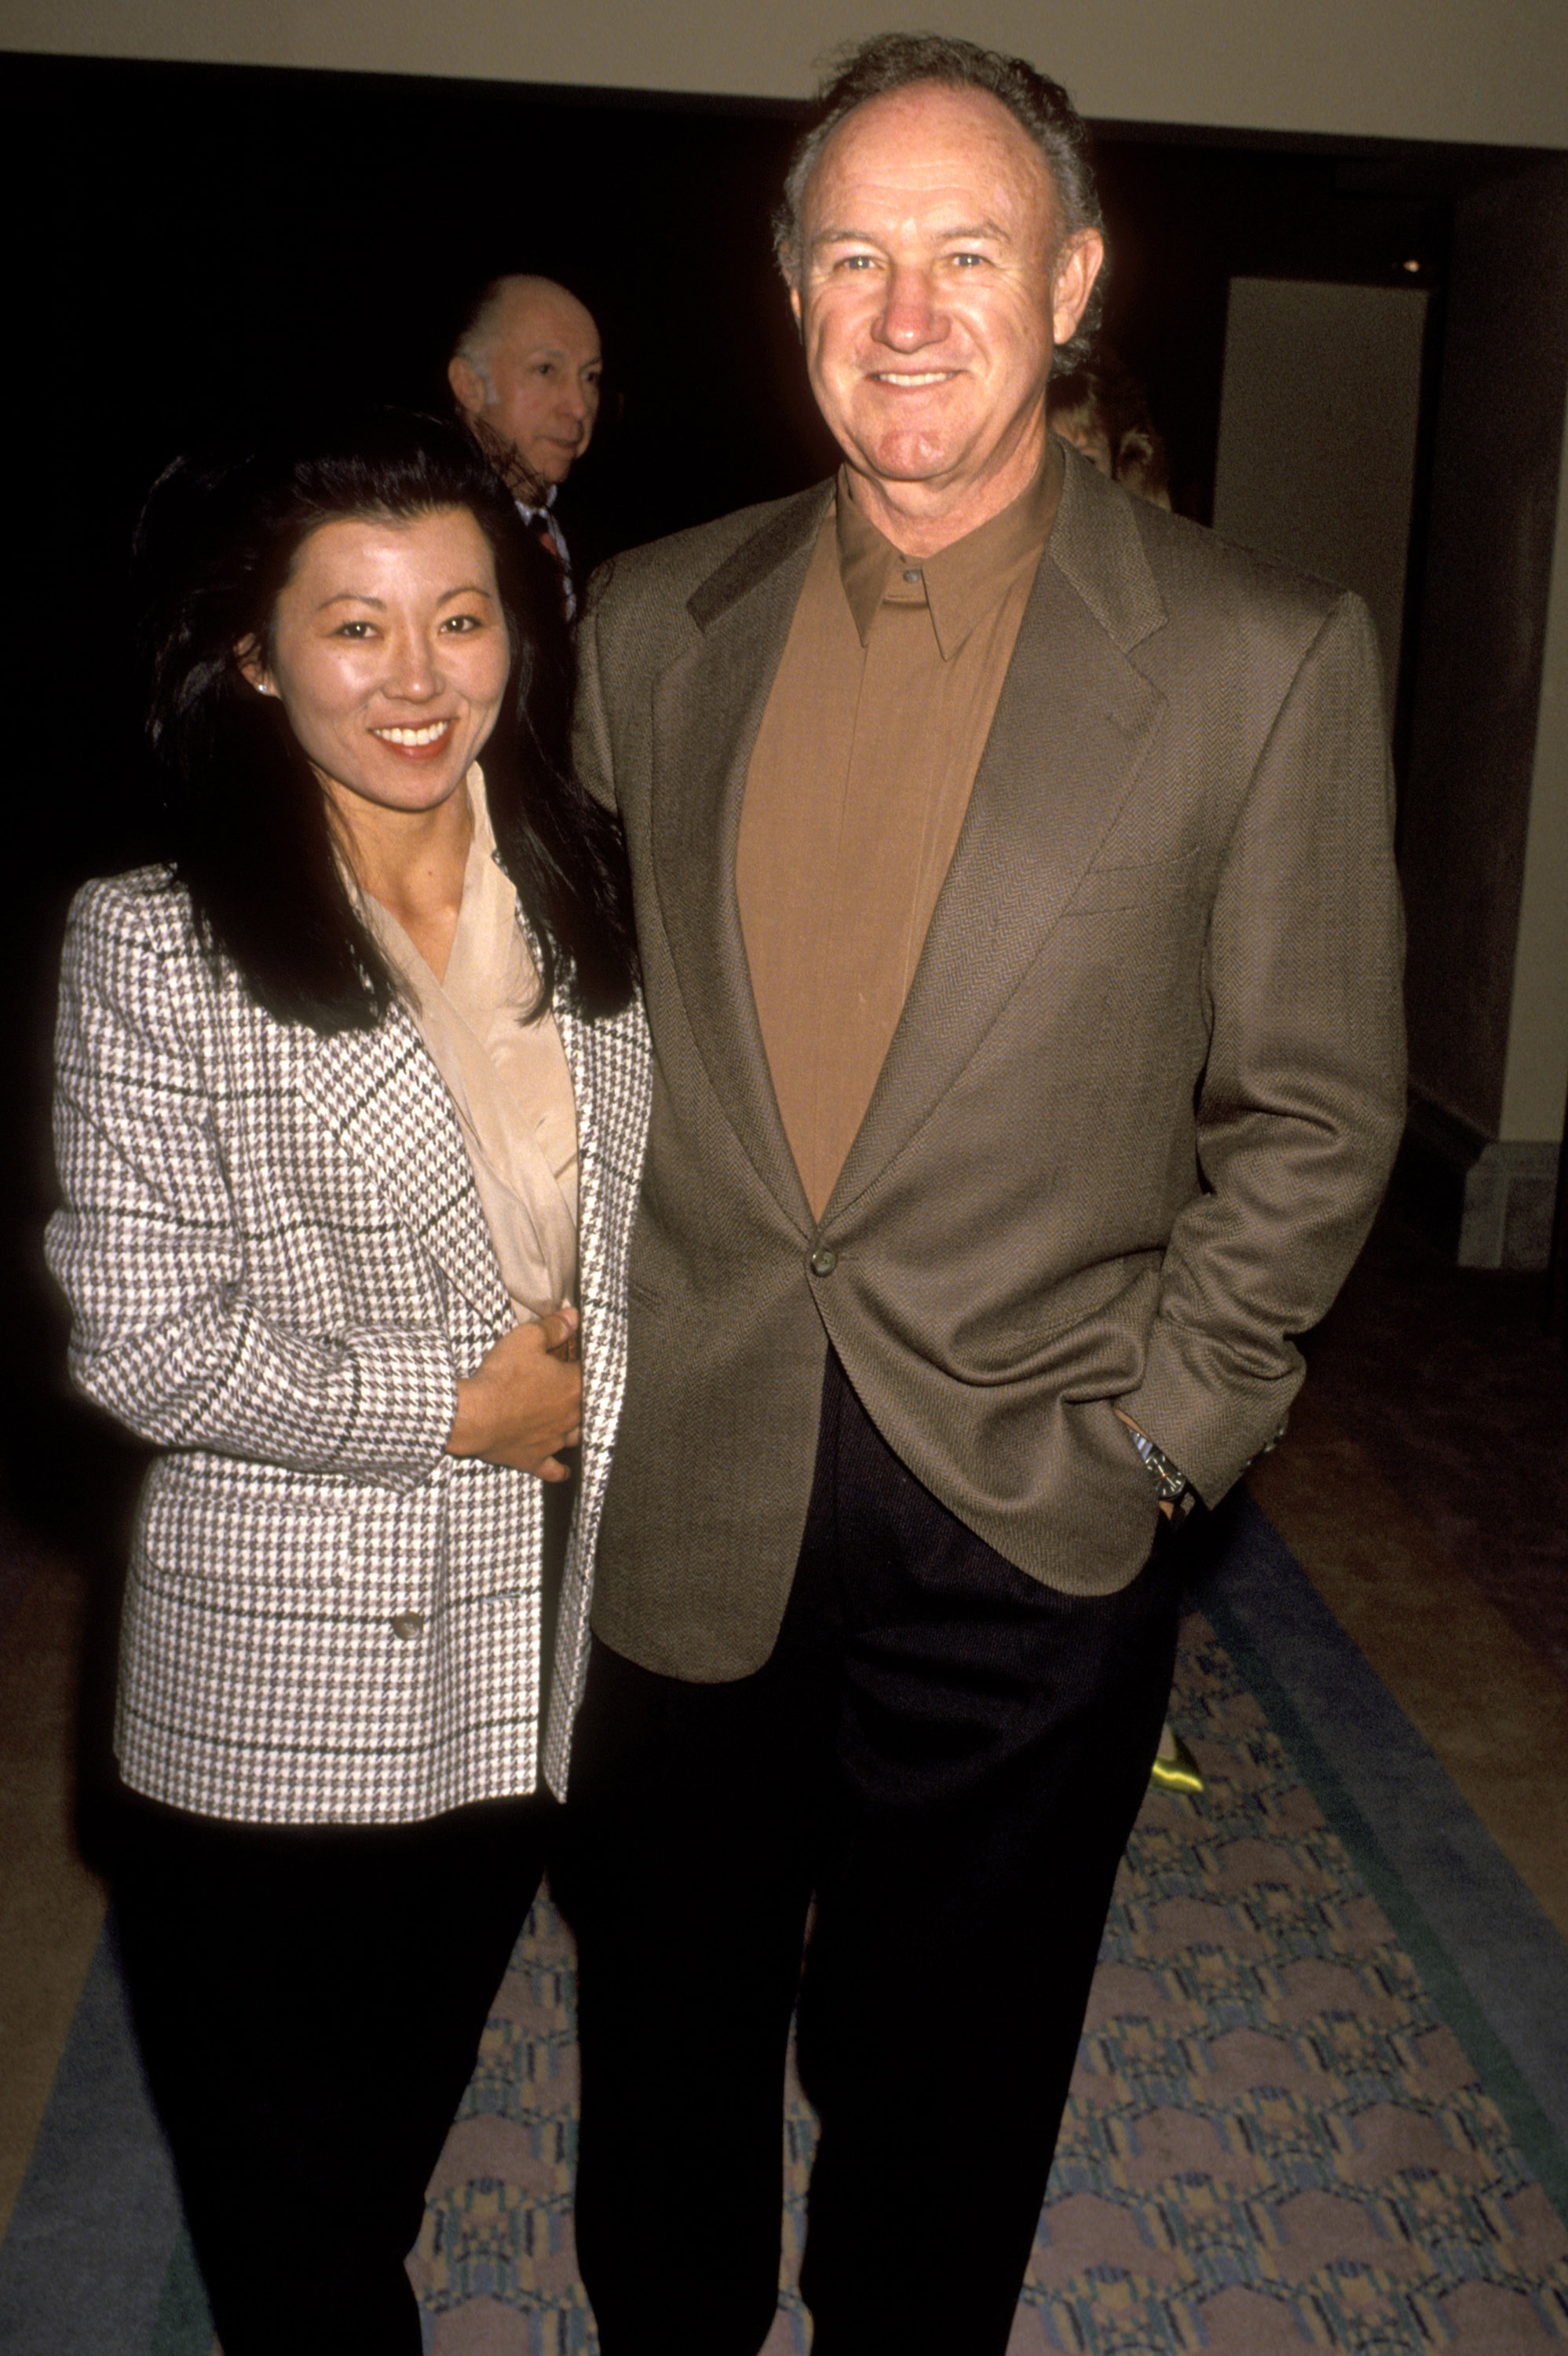 Betsy Arakawa and Gene Hackman at the Celebrity Sports Invitational on November 29, 1991, at Westin Mission Hills Resort in Rancho Mirage, California | Source: Getty Images